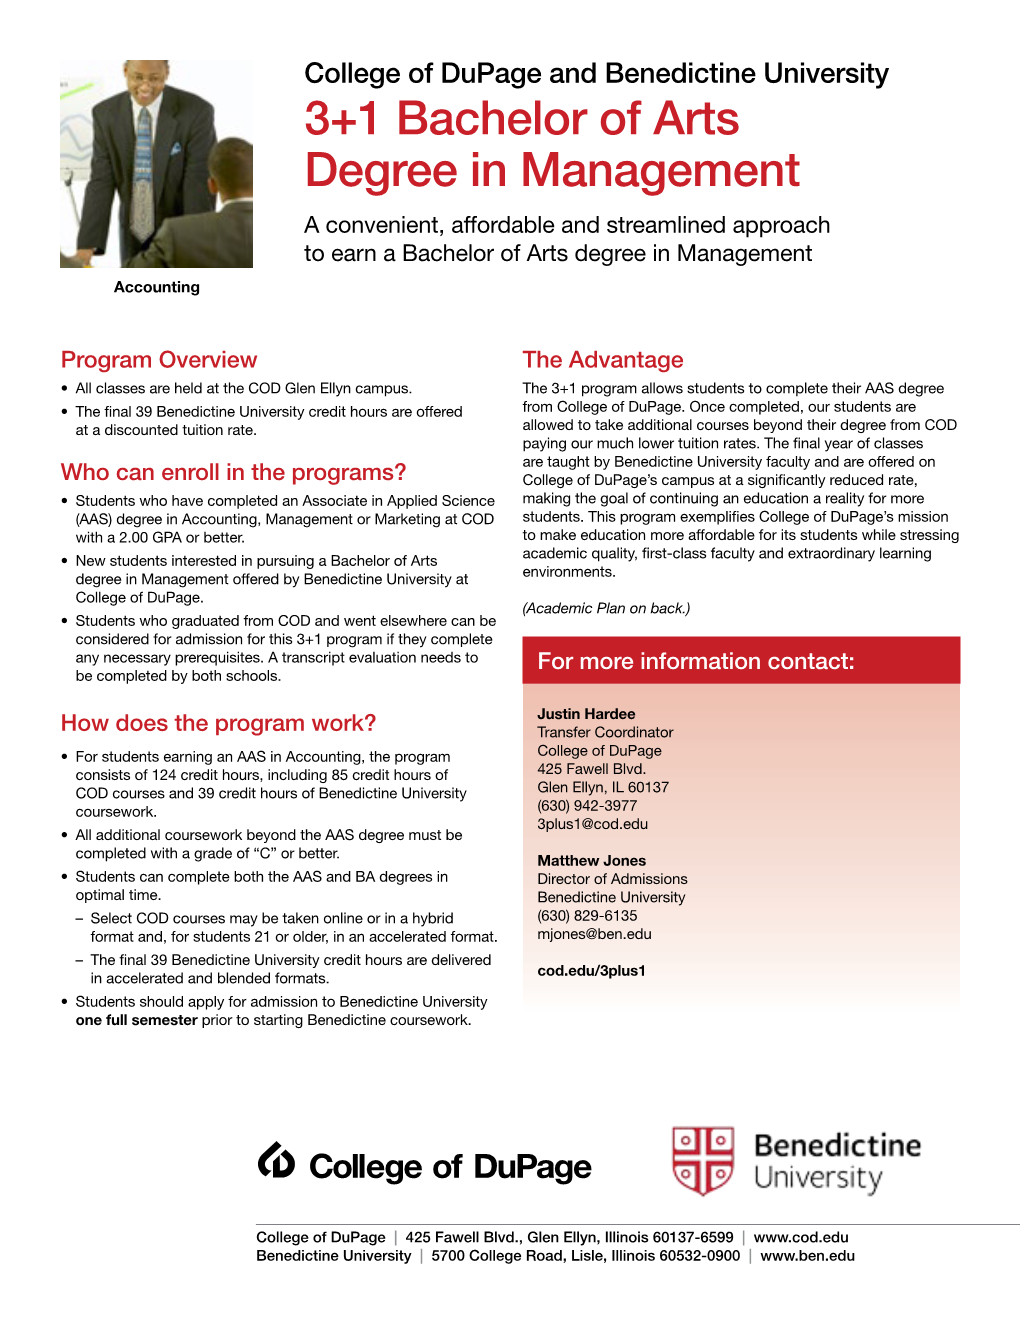 3+1 Bachelor of Arts Degree in Management a Convenient, Affordable and Streamlined Approach to Earn a Bachelor of Arts Degree in Management Accounting